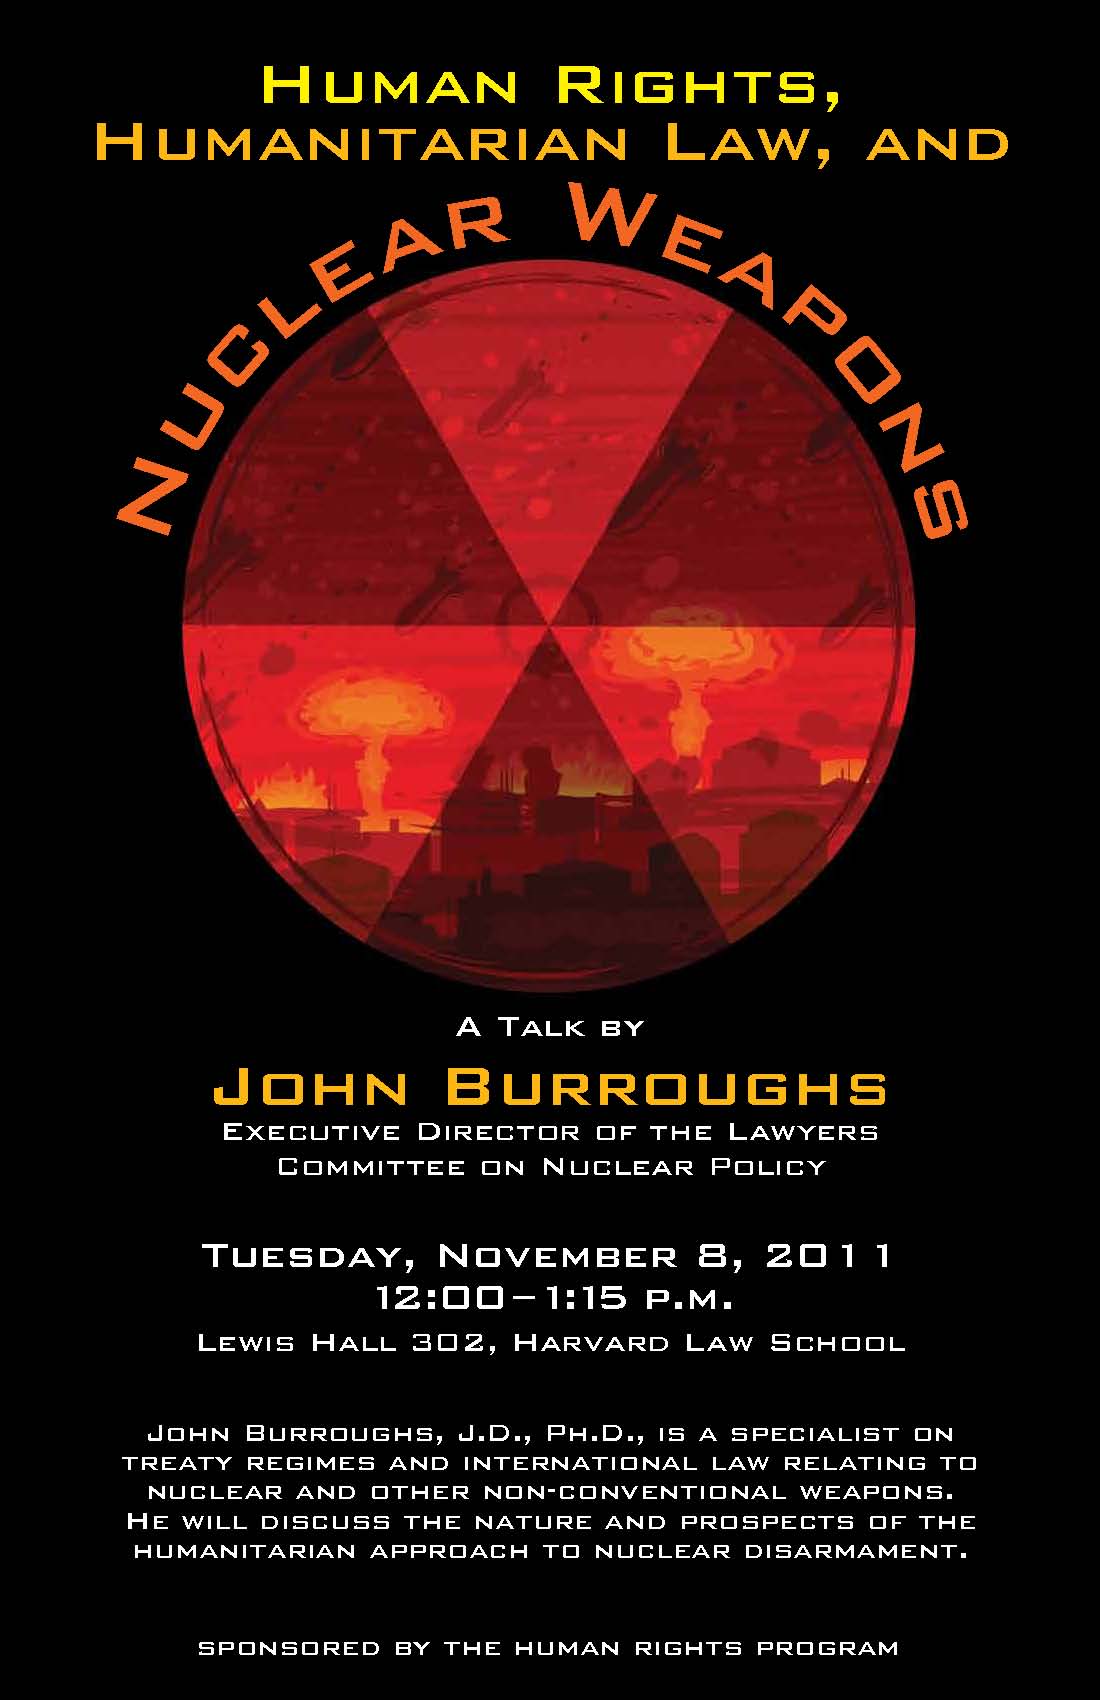 Event poster displays a red circle warning sign with mushroom clouds behind it, illustrating the fearsome quality of nuclear weapons.